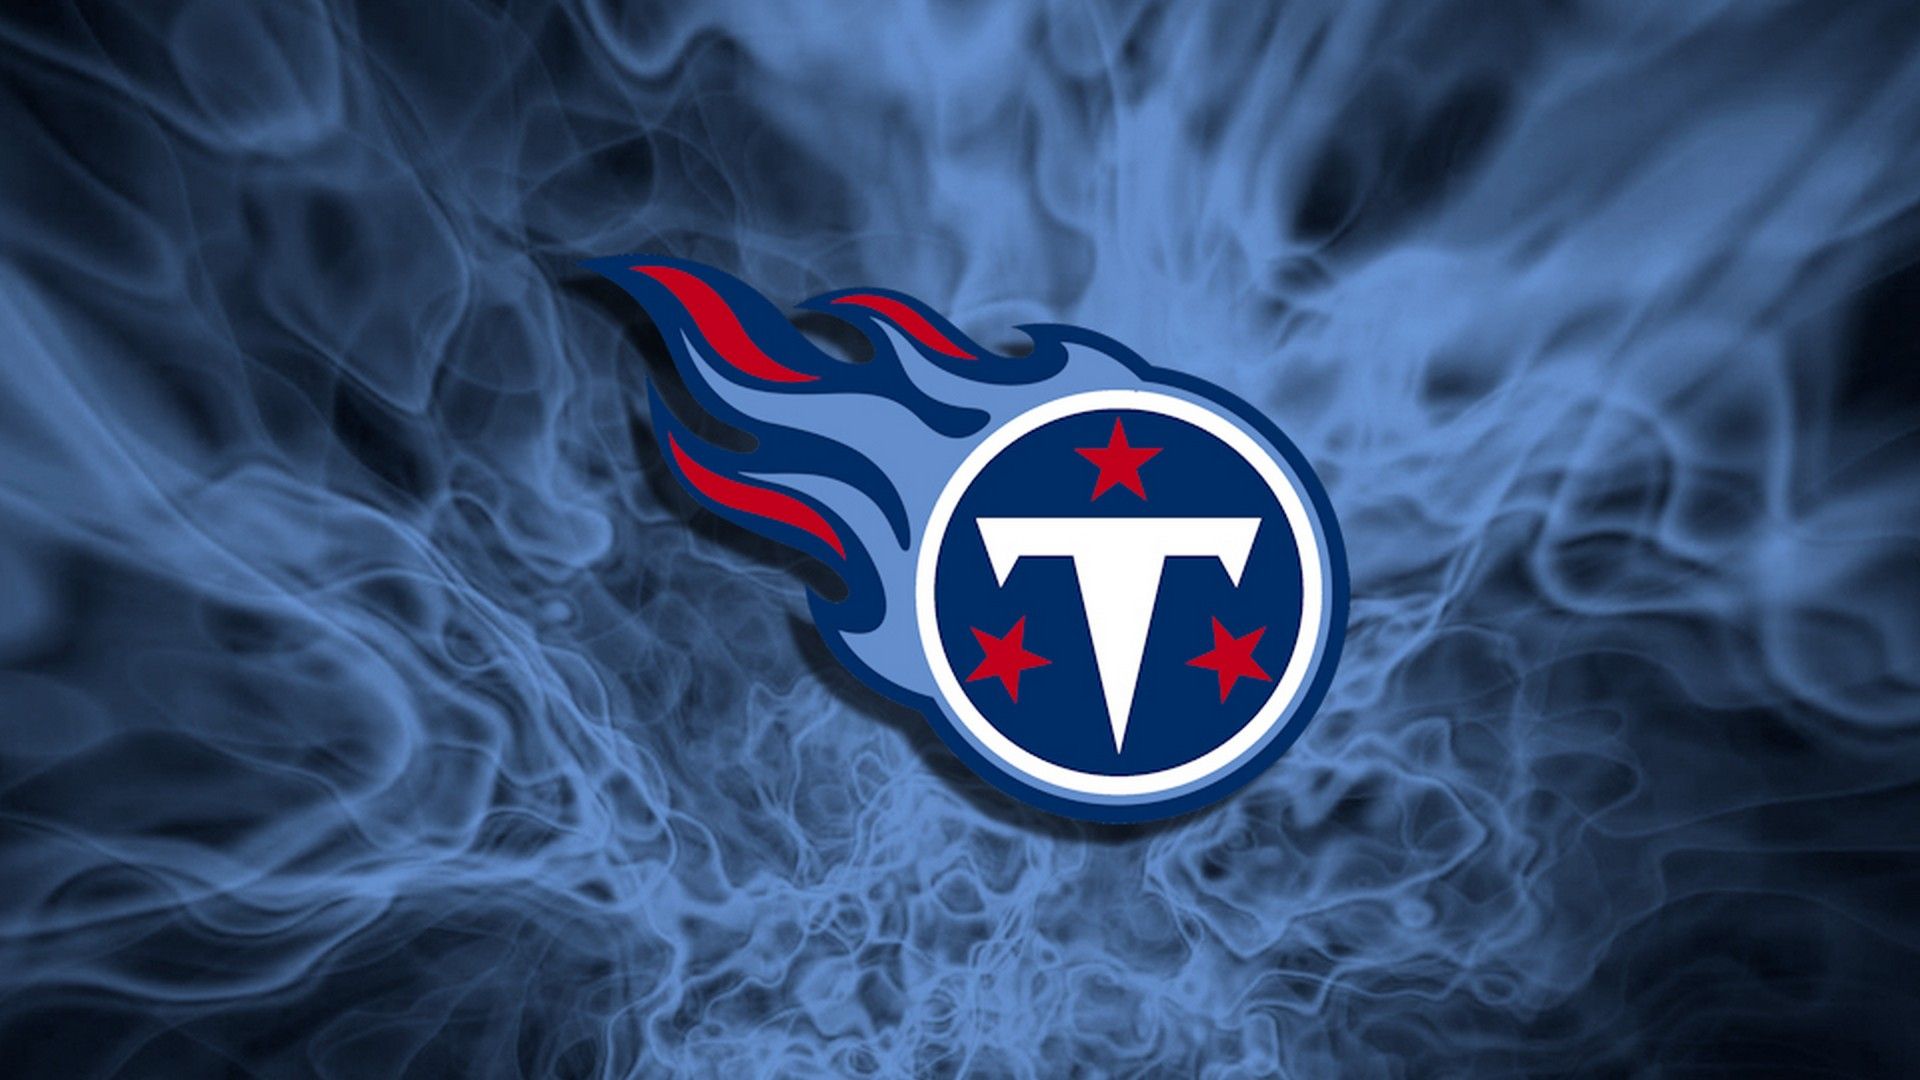 Background Tennessee Titans HD NFL Football Wallpaper